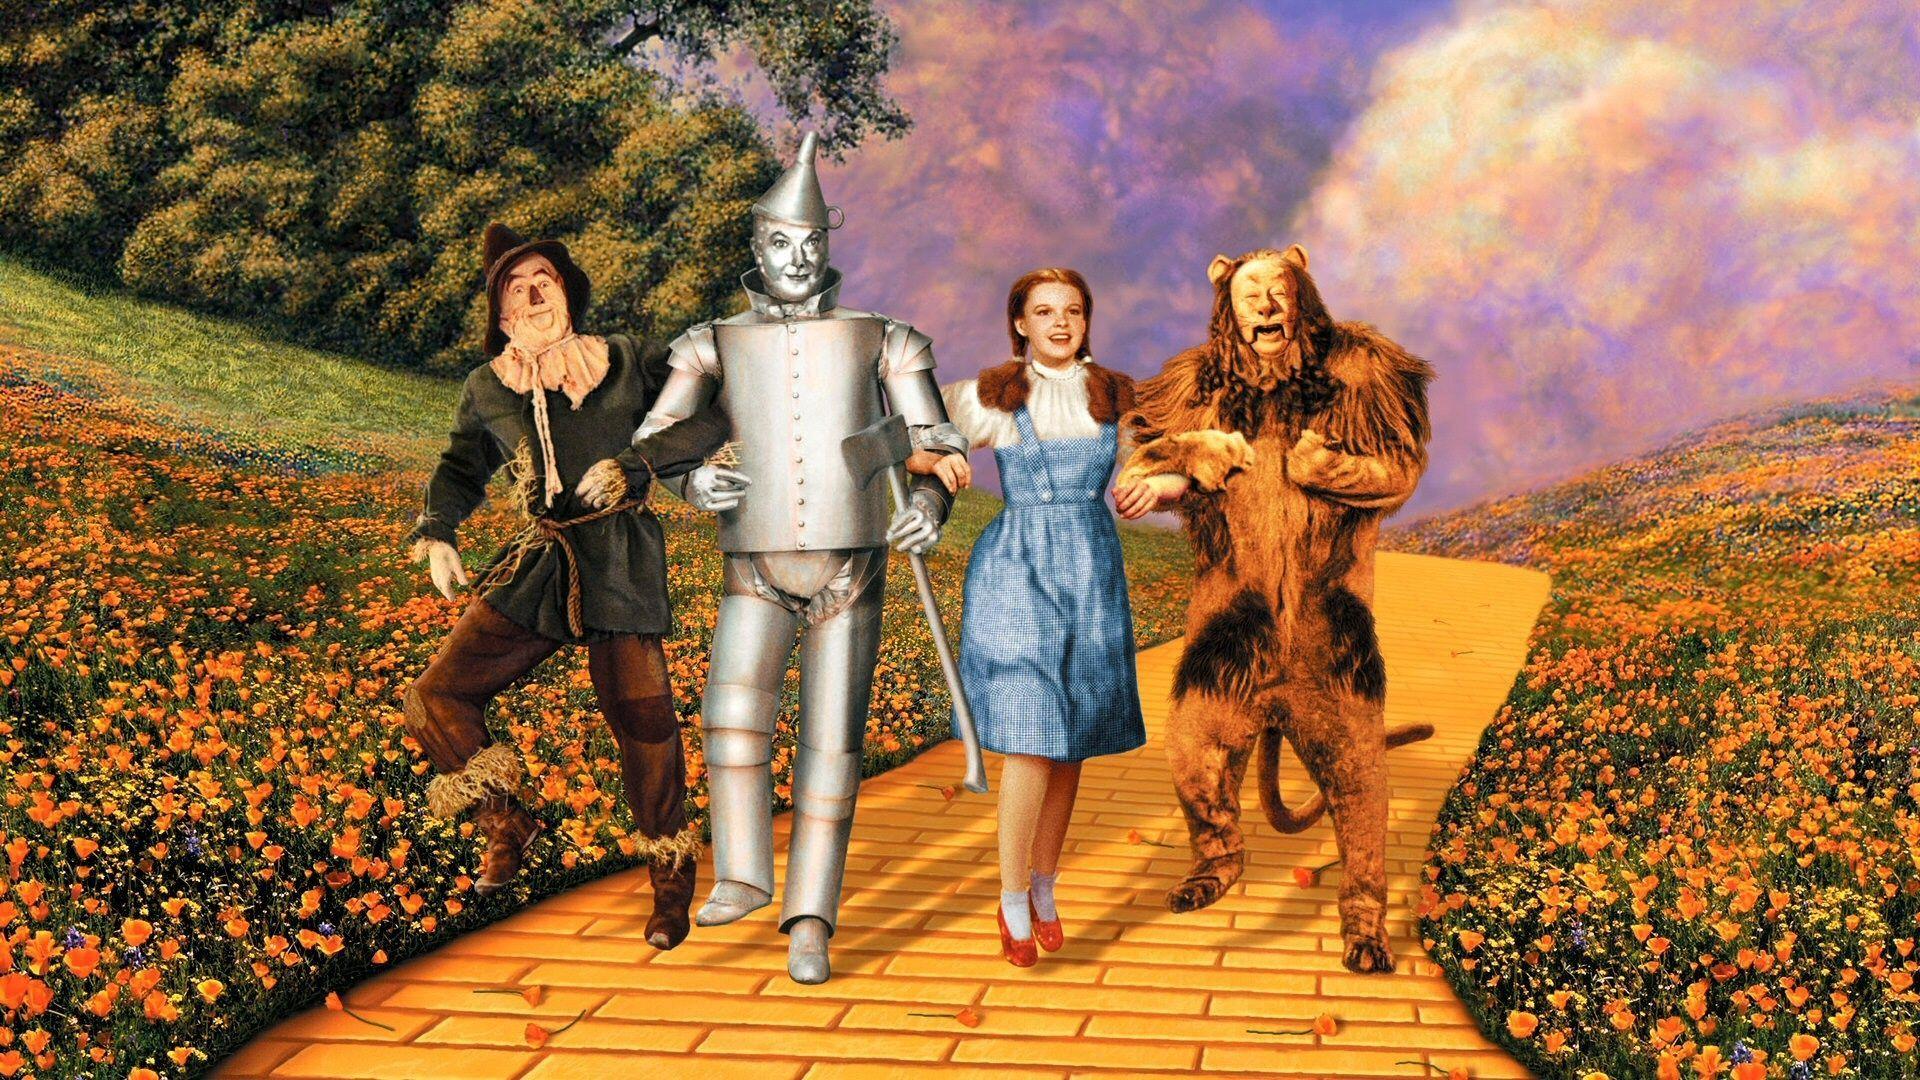 Review: The Wizard of Oz (4K) Based Update